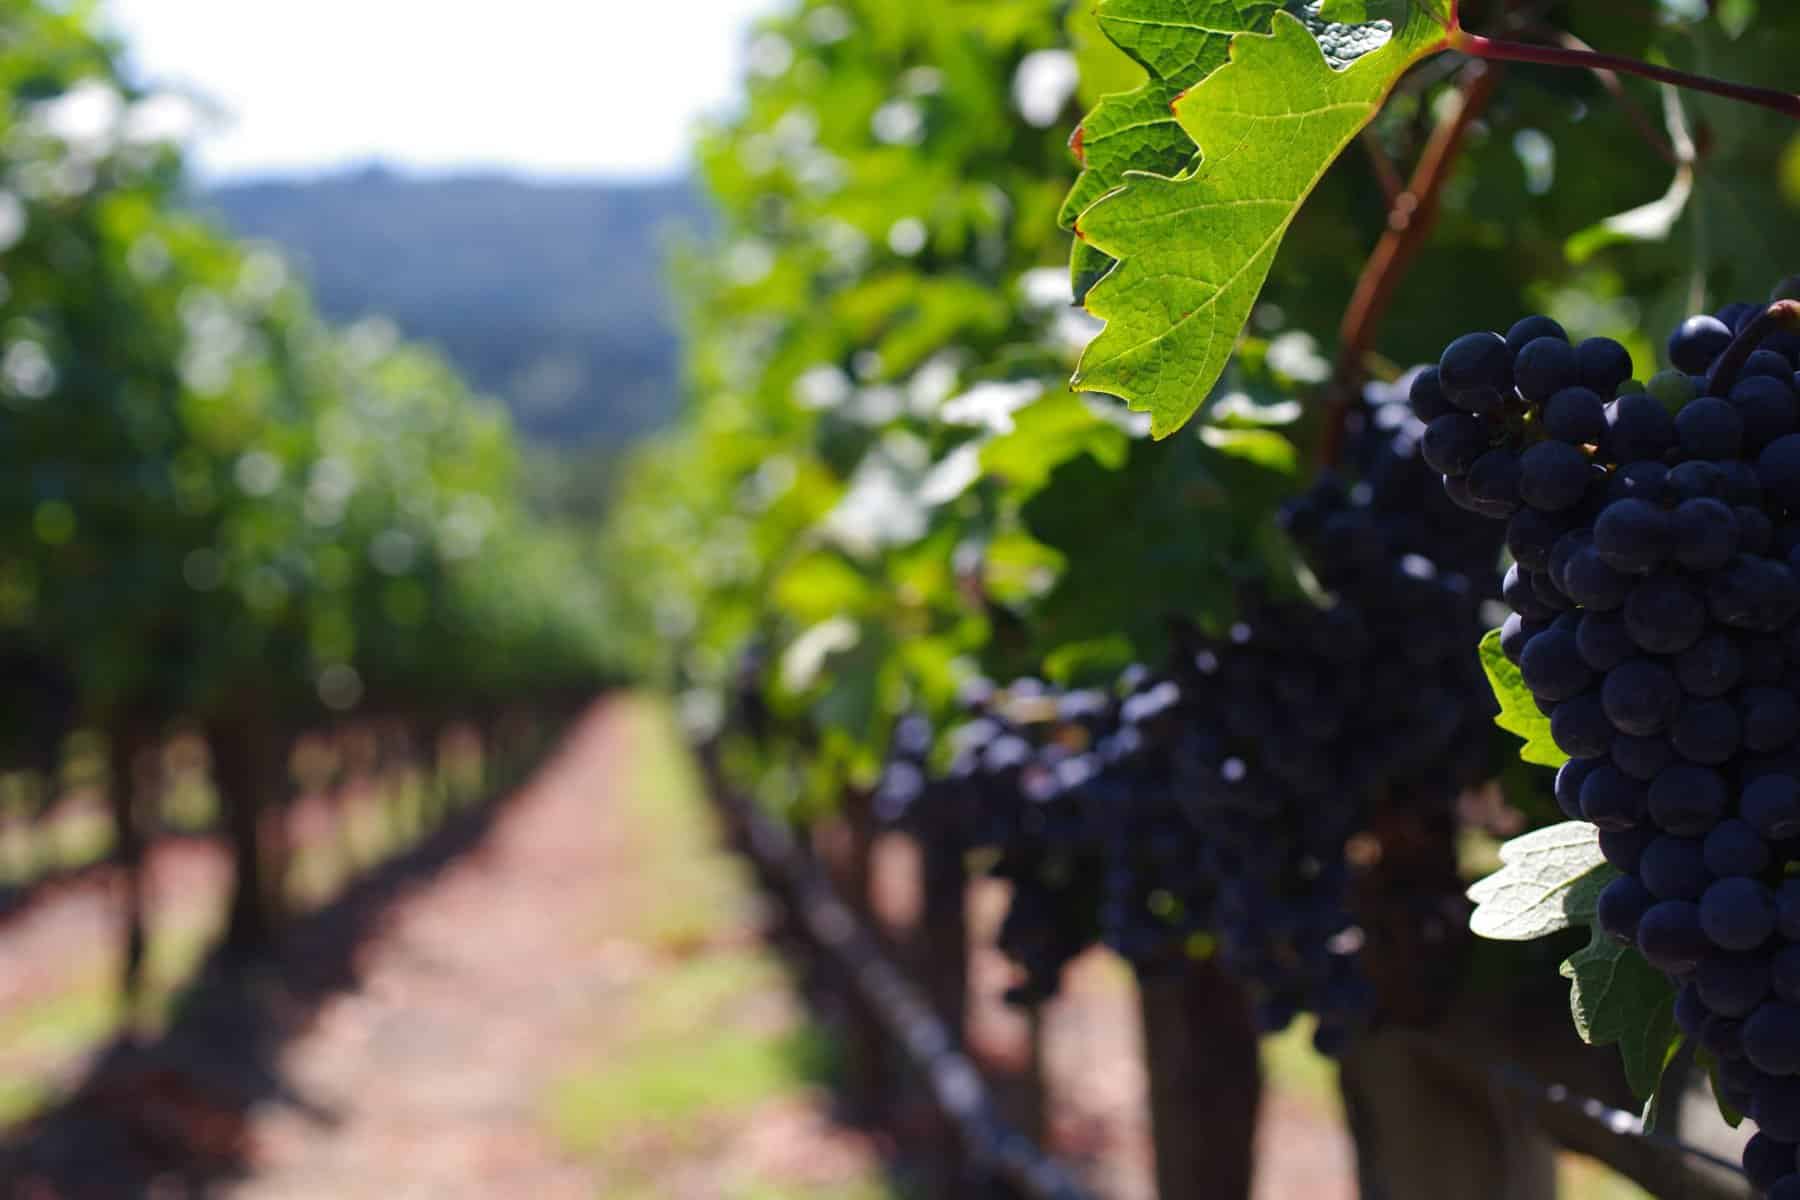 Grapes growing in a vineyard.